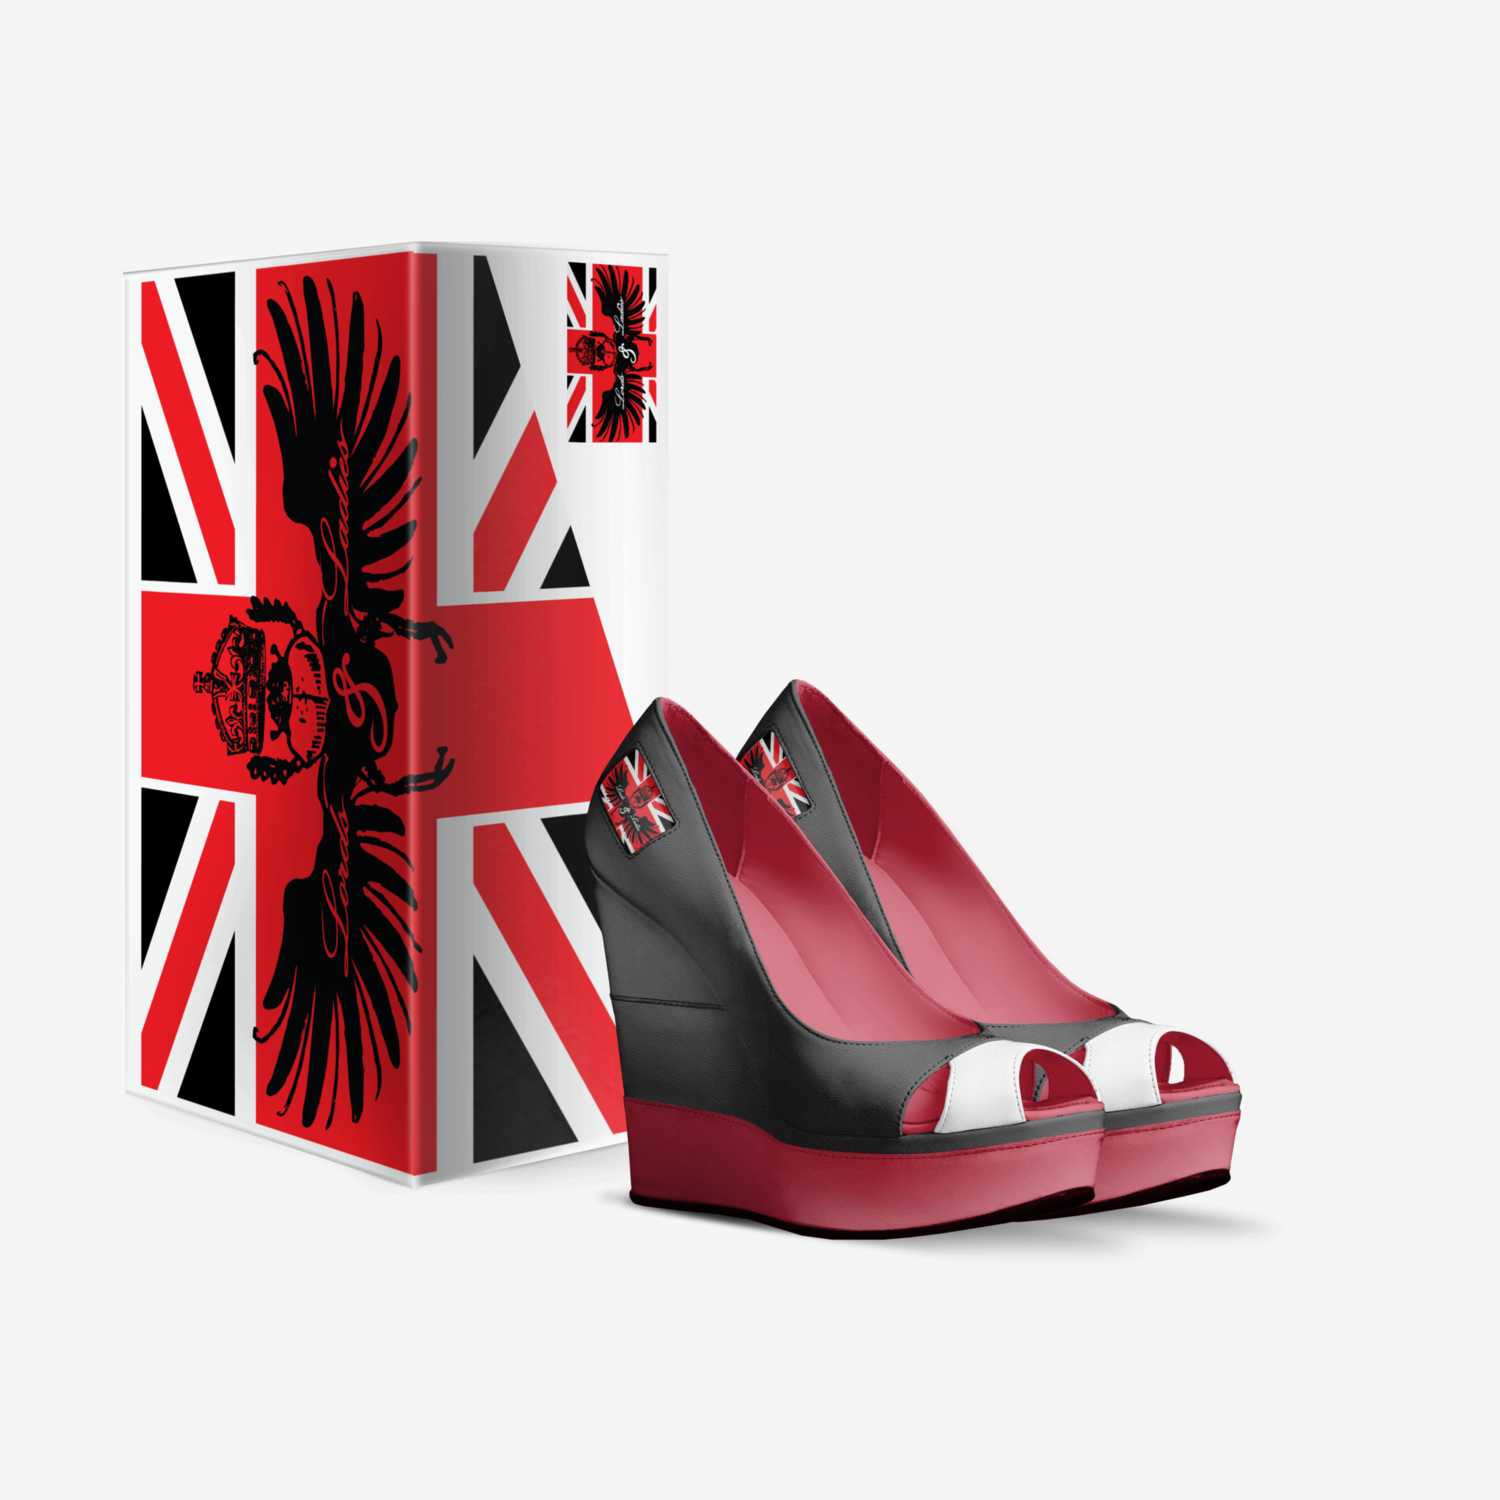 Sass custom made in Italy shoes by David Wall | Box view